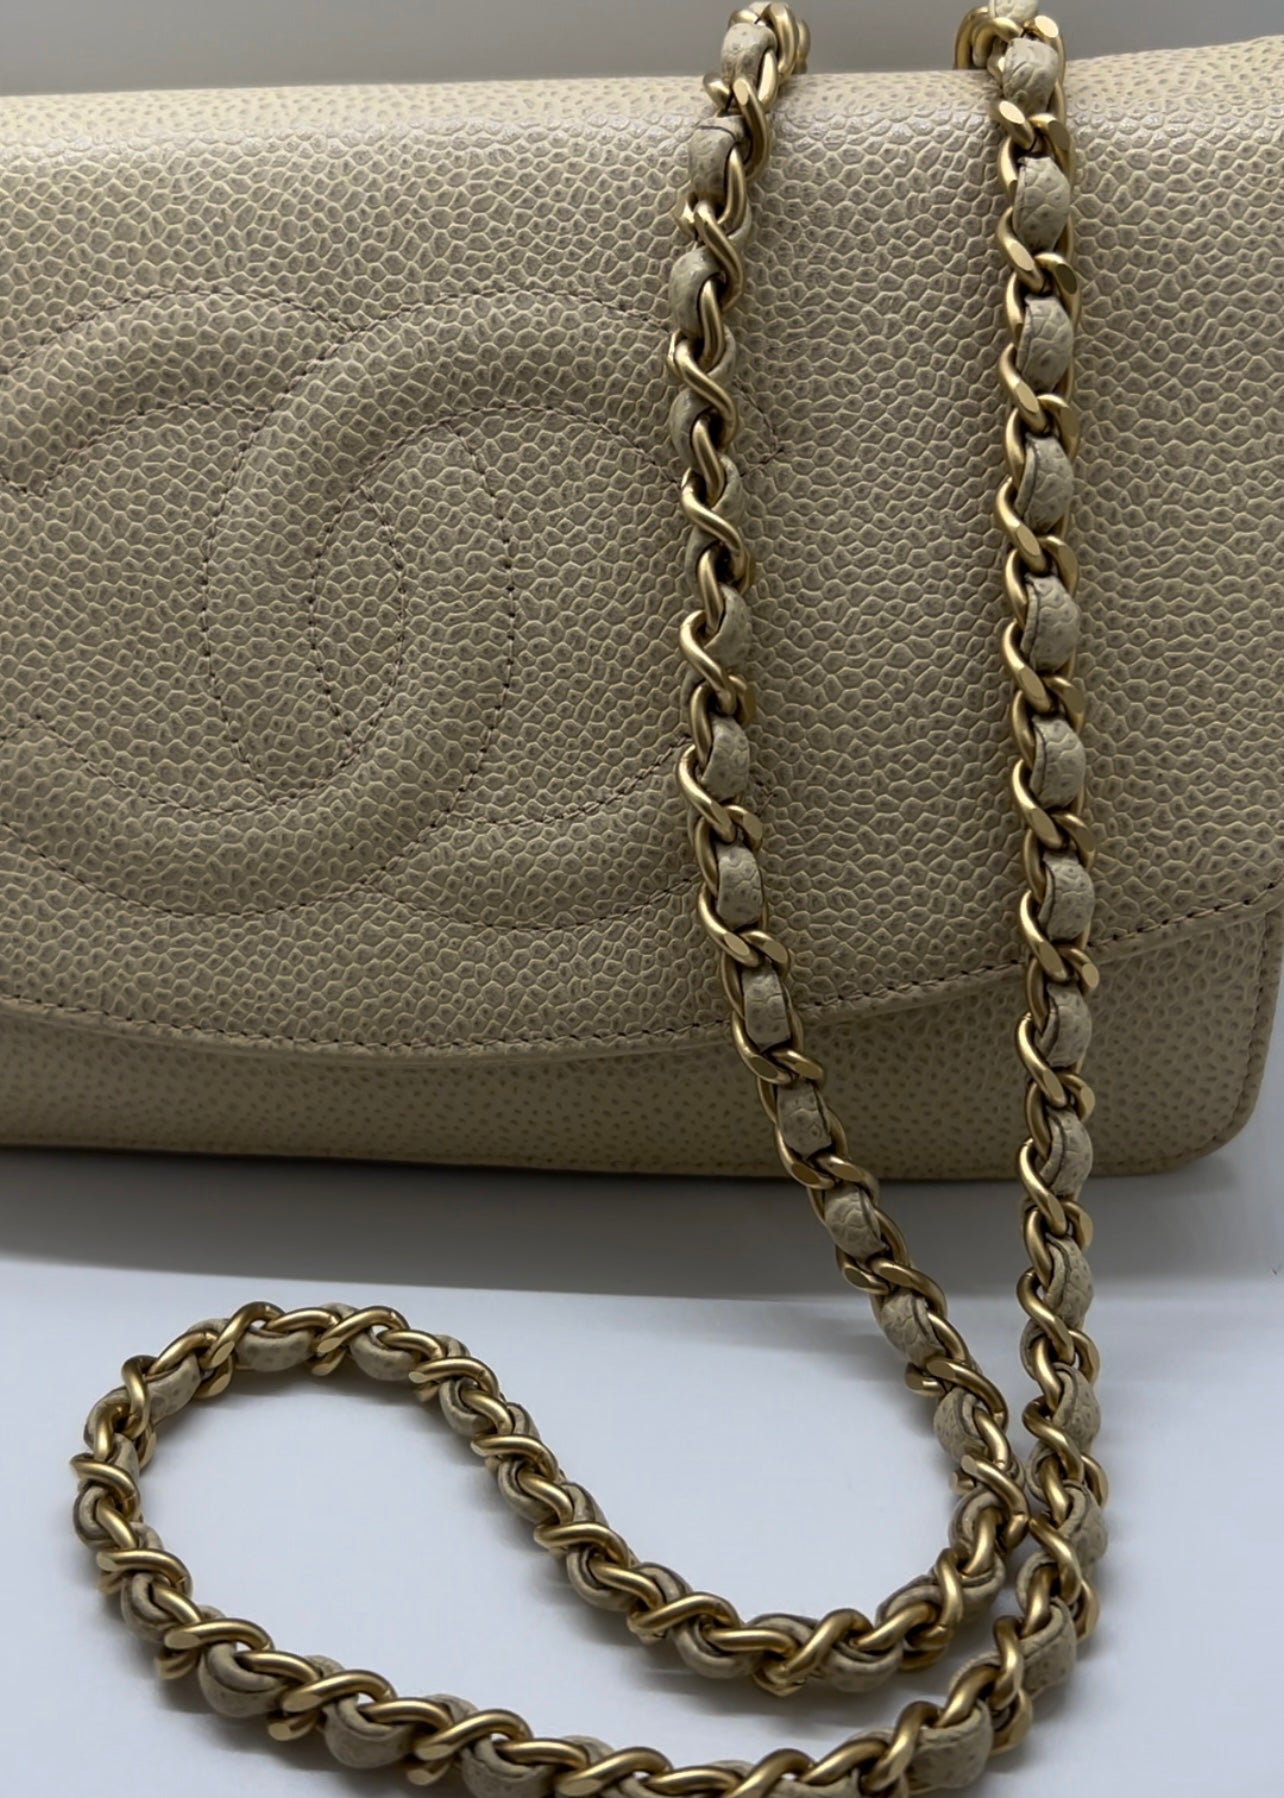 Chanel Timeless Vintage Wallet On A Chain